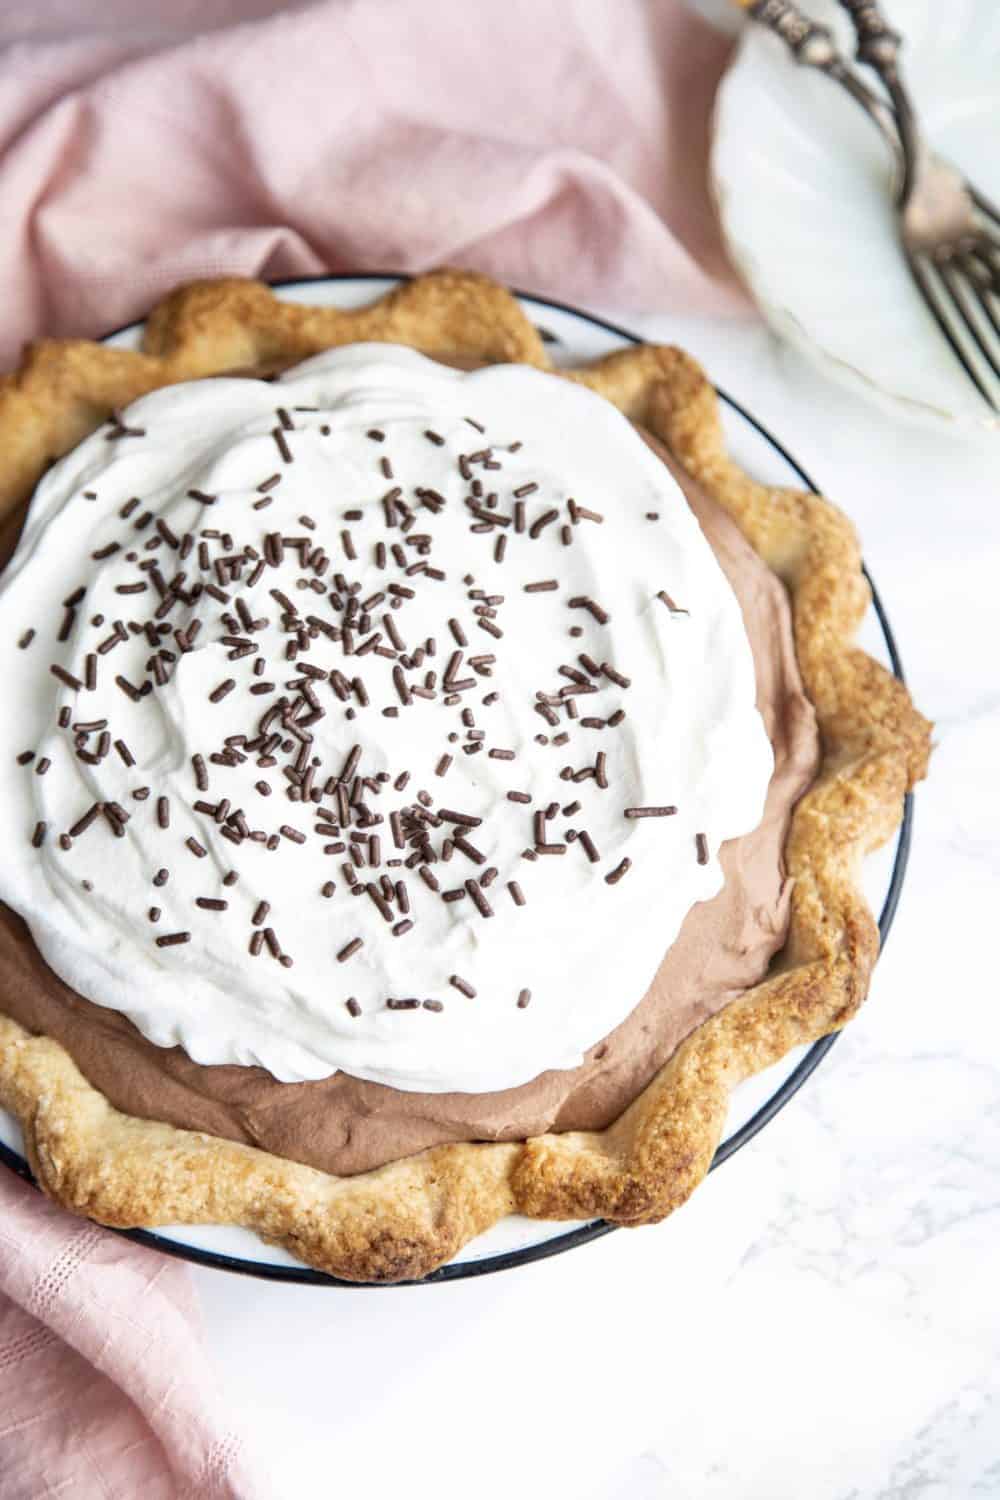 French Silk pie with whipped topping and chocolate sprinkles.